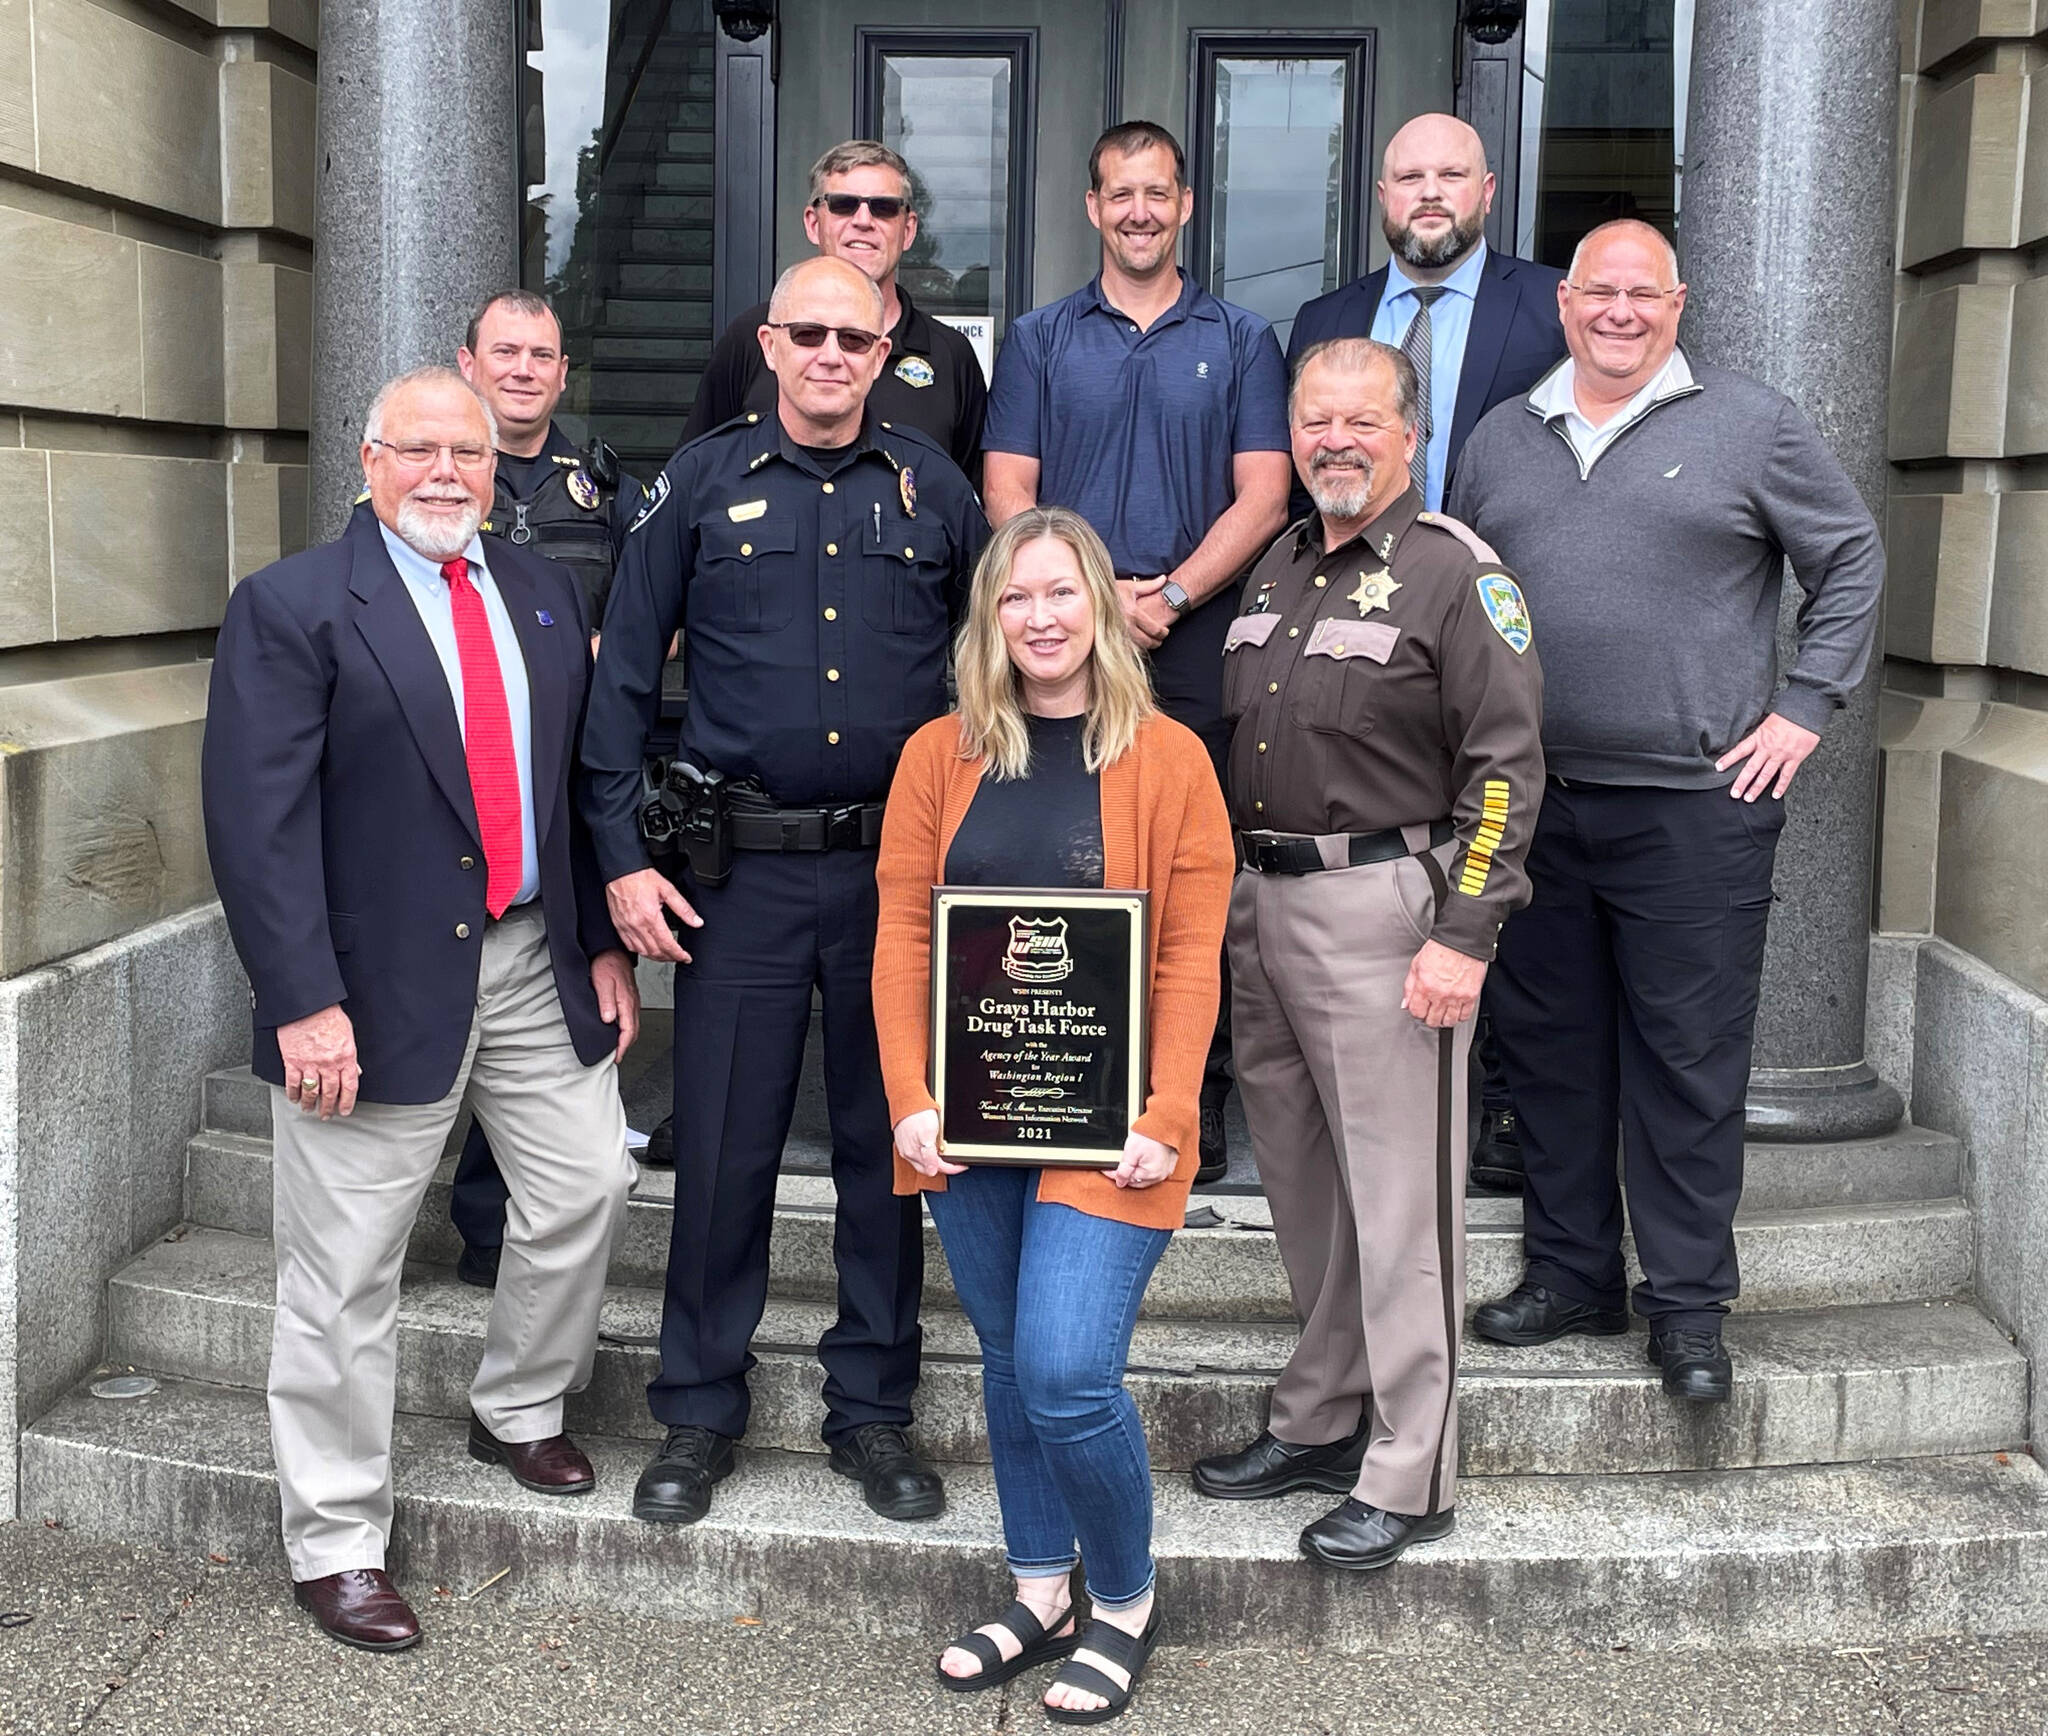 Members of the Grays Harbor County Drug Task Force display the award presented by the Western States Information Network. Front row: Support Specialist Mendi Stump. From left, second row: John Martin (WSIN), Hoquiam PD Interim Chief Joe Strong and GH Sherriff Rick Scott; third row: Aberdeen Interim Chief Dale Green and GHSO Chief of Investigators Darrin Wallace; Back row: APD Deputy Chief Jay Staten, GHSO Chief Criminal Deputy Kevin Schrader and GH Senior Deputy Prosecutor Scott Gripp. Submitted photo